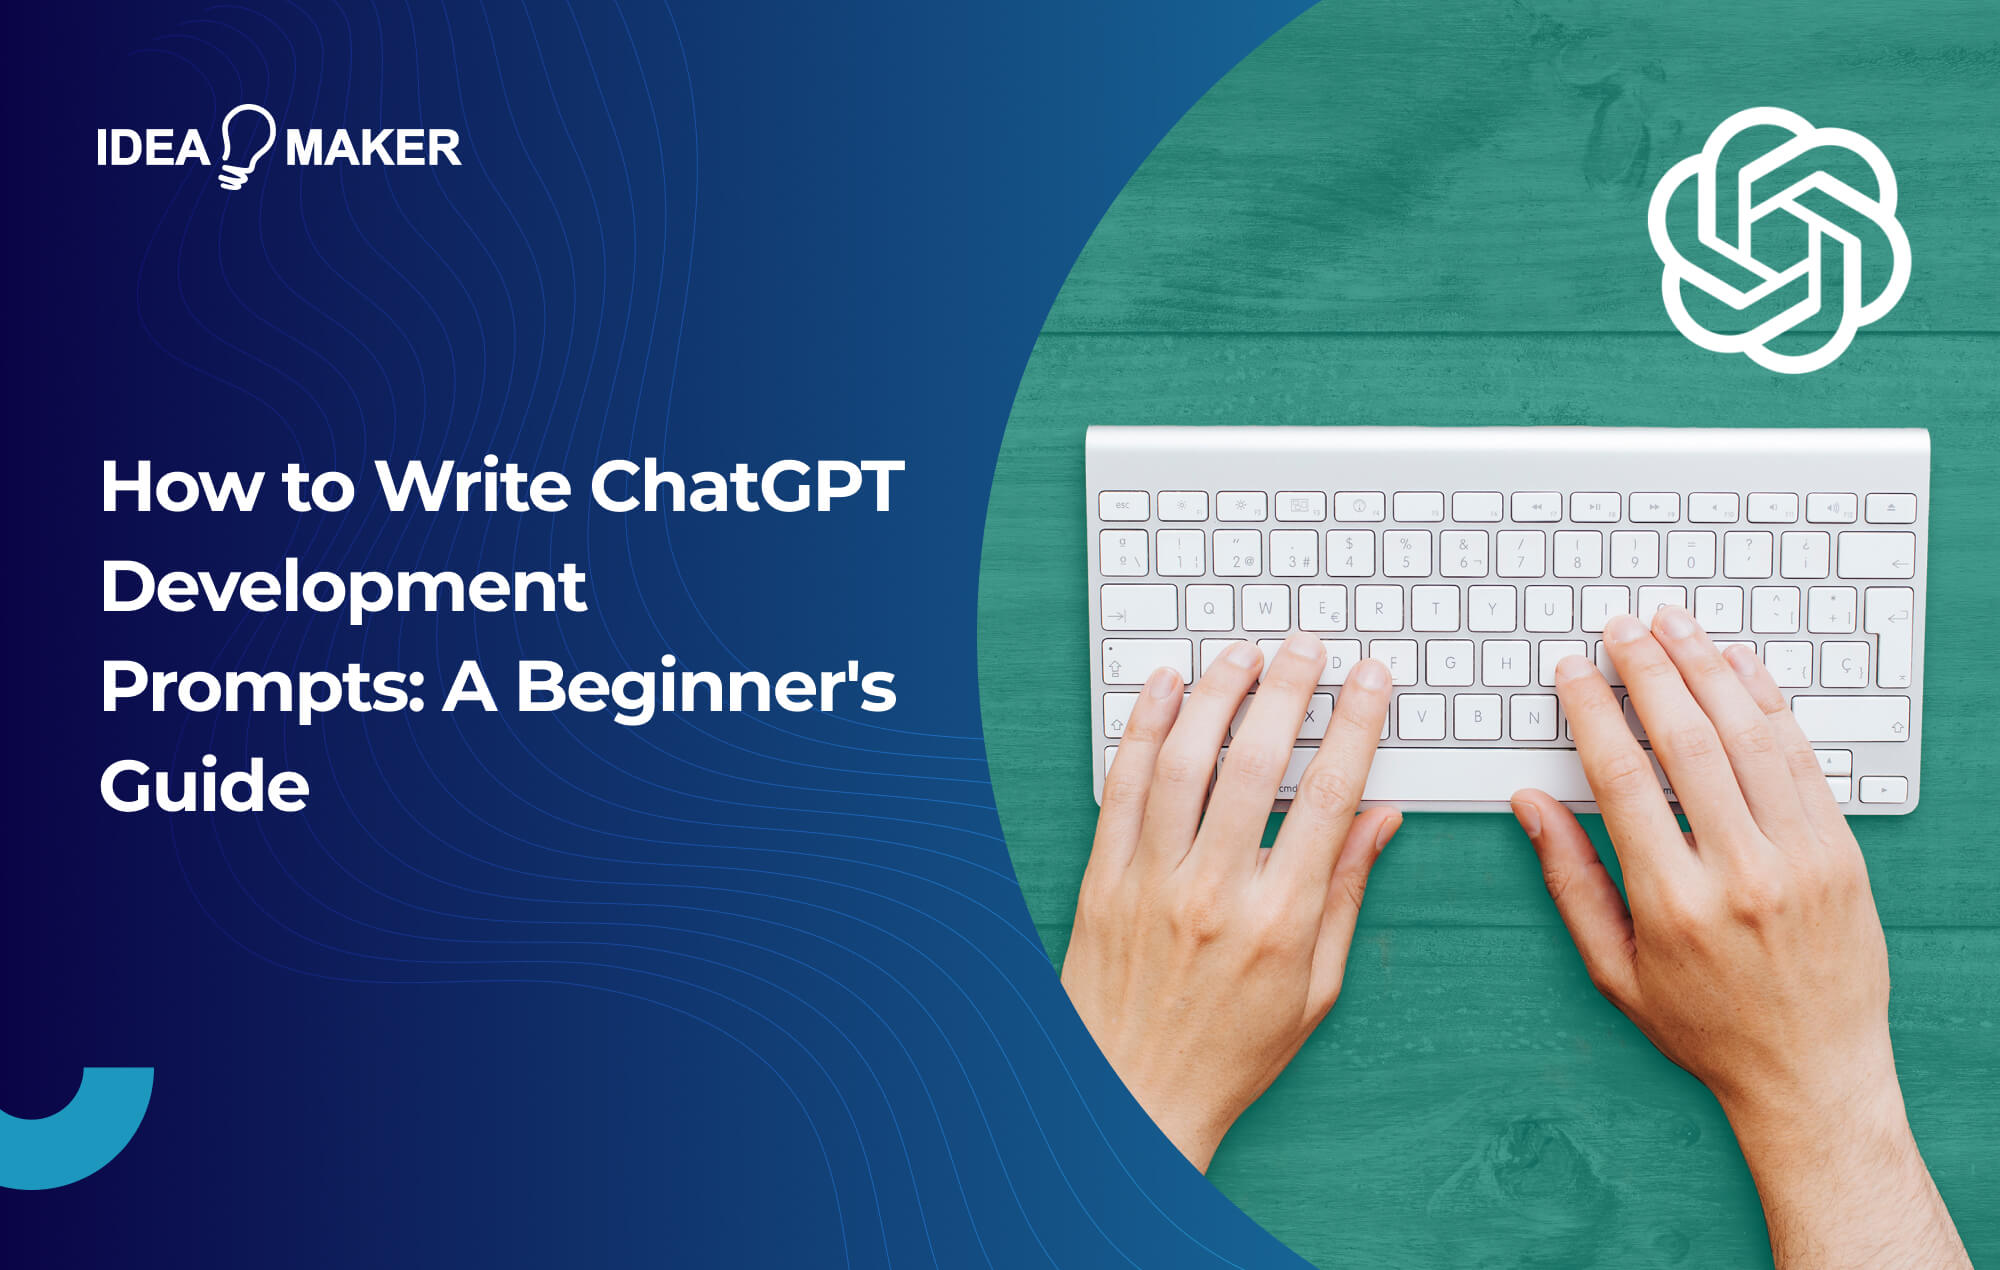 Ideamaker - How to Write ChatGPT Development Prompts_ A Beginner's Guide